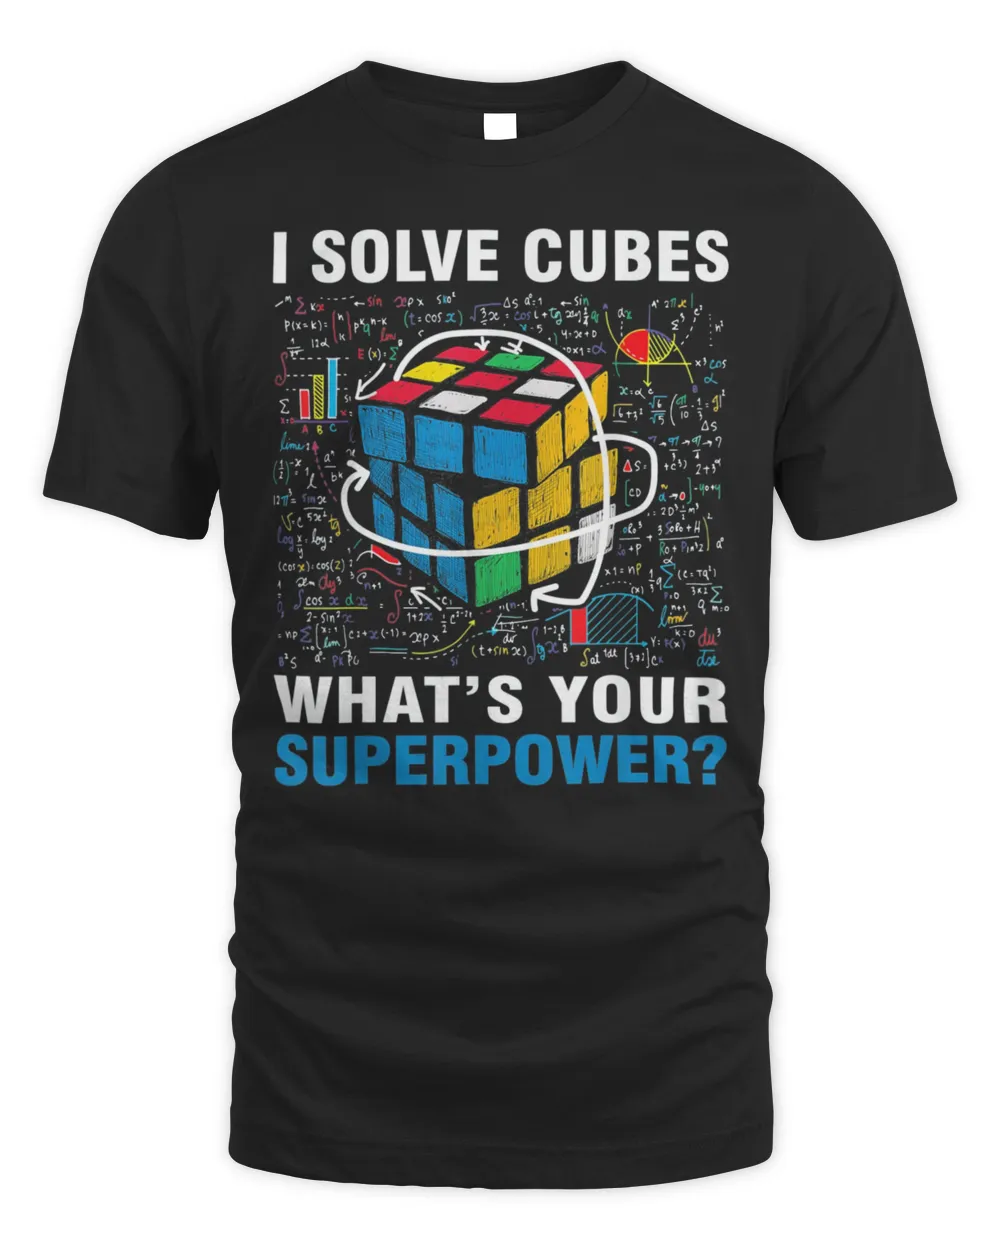 I Solve Cubes Superpower Speed Cubing T-Shirt